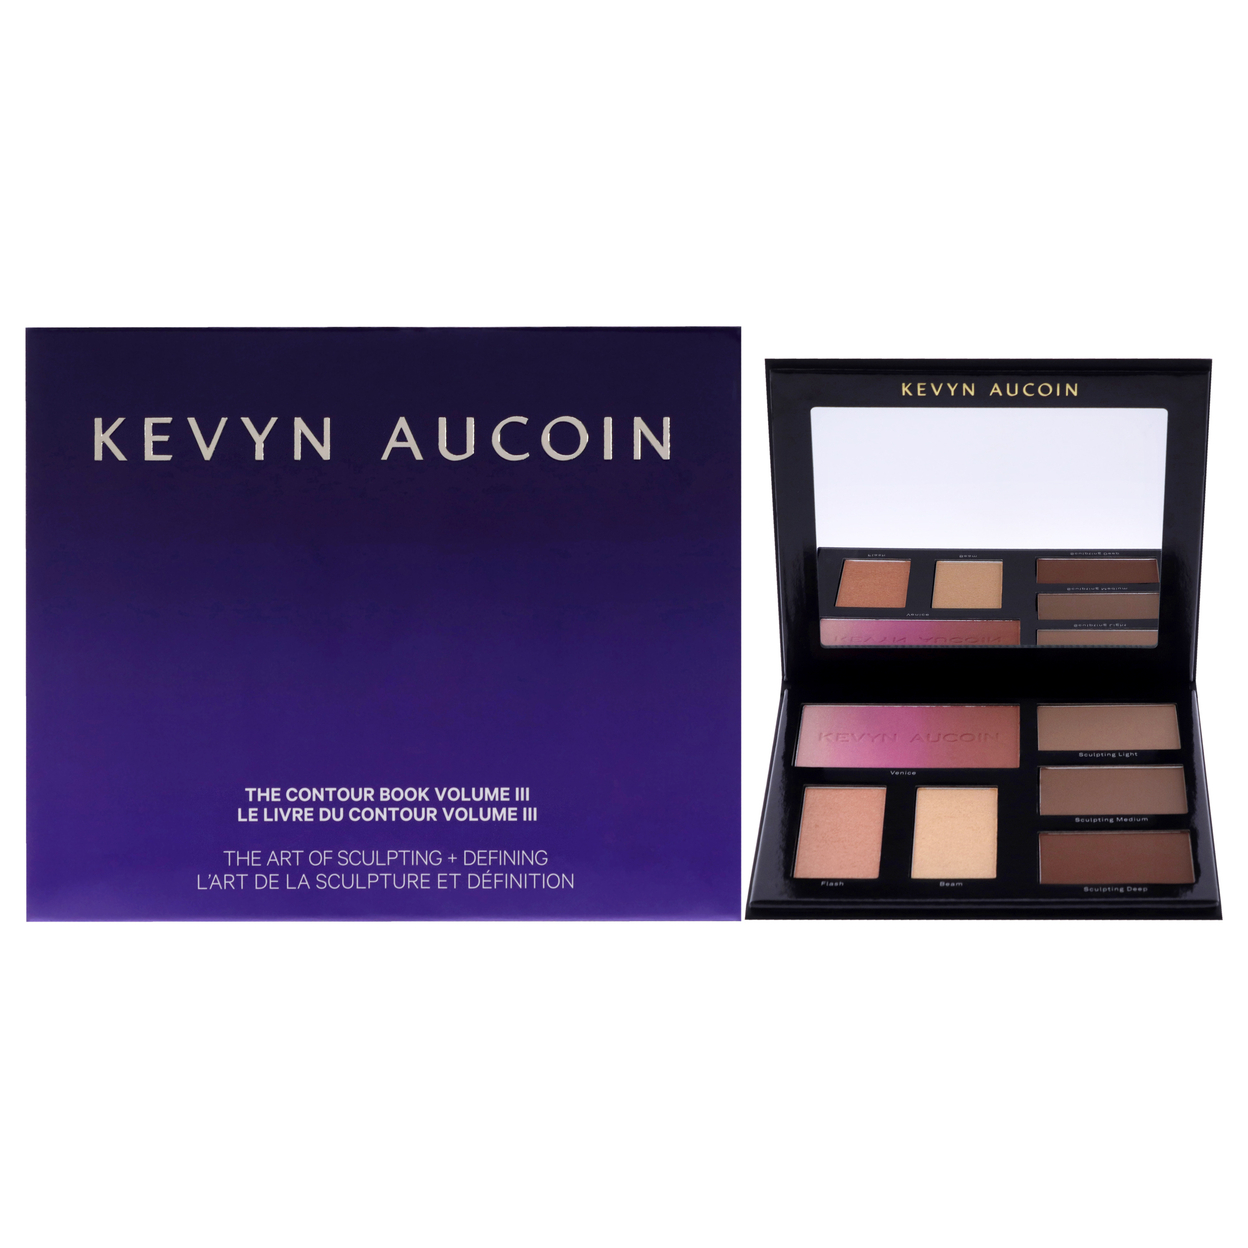 Kevyn Aucoin The Contour Book - The Art Of Sculpting And Defining Volume III Makeup 0.7 Oz